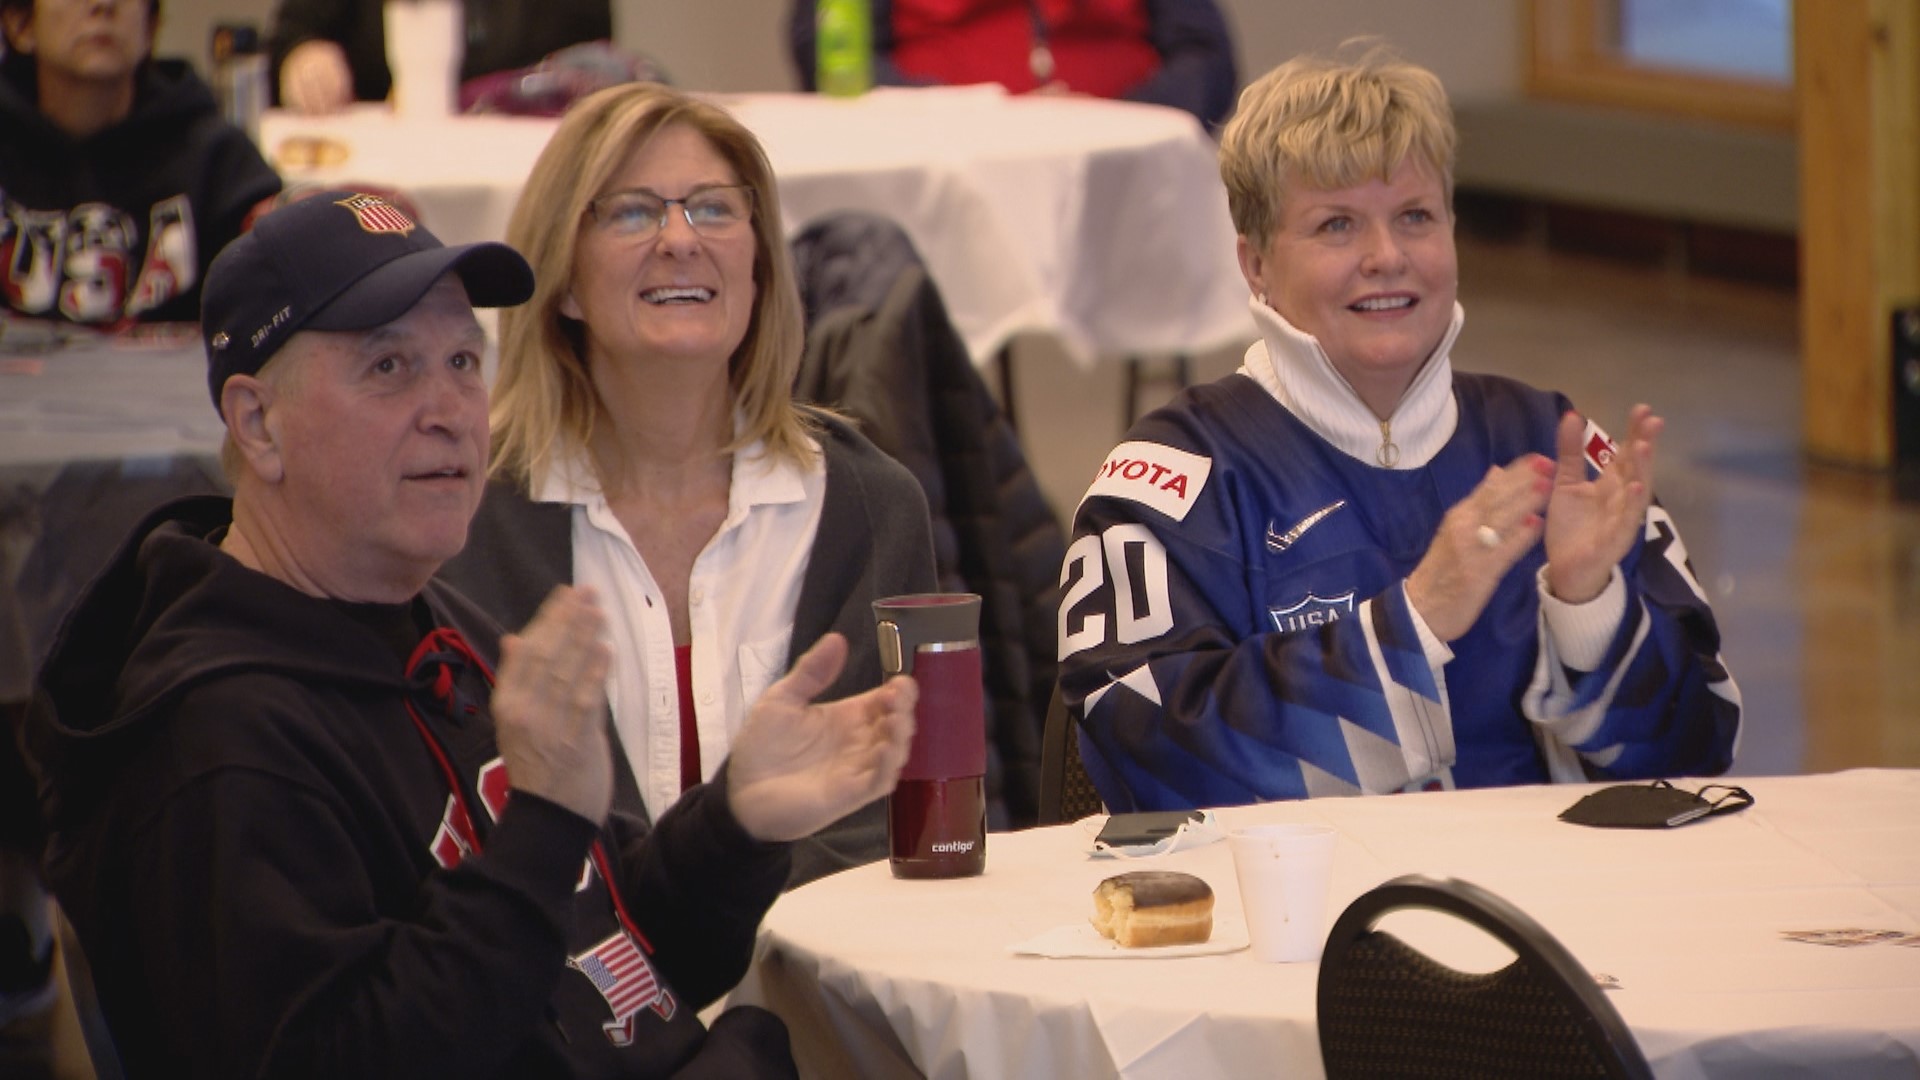 The community organized a watch party for Greg and Robin Brandt so they could cheer on their daughter Hannah and the rest of the USA Women's Hockey Team.